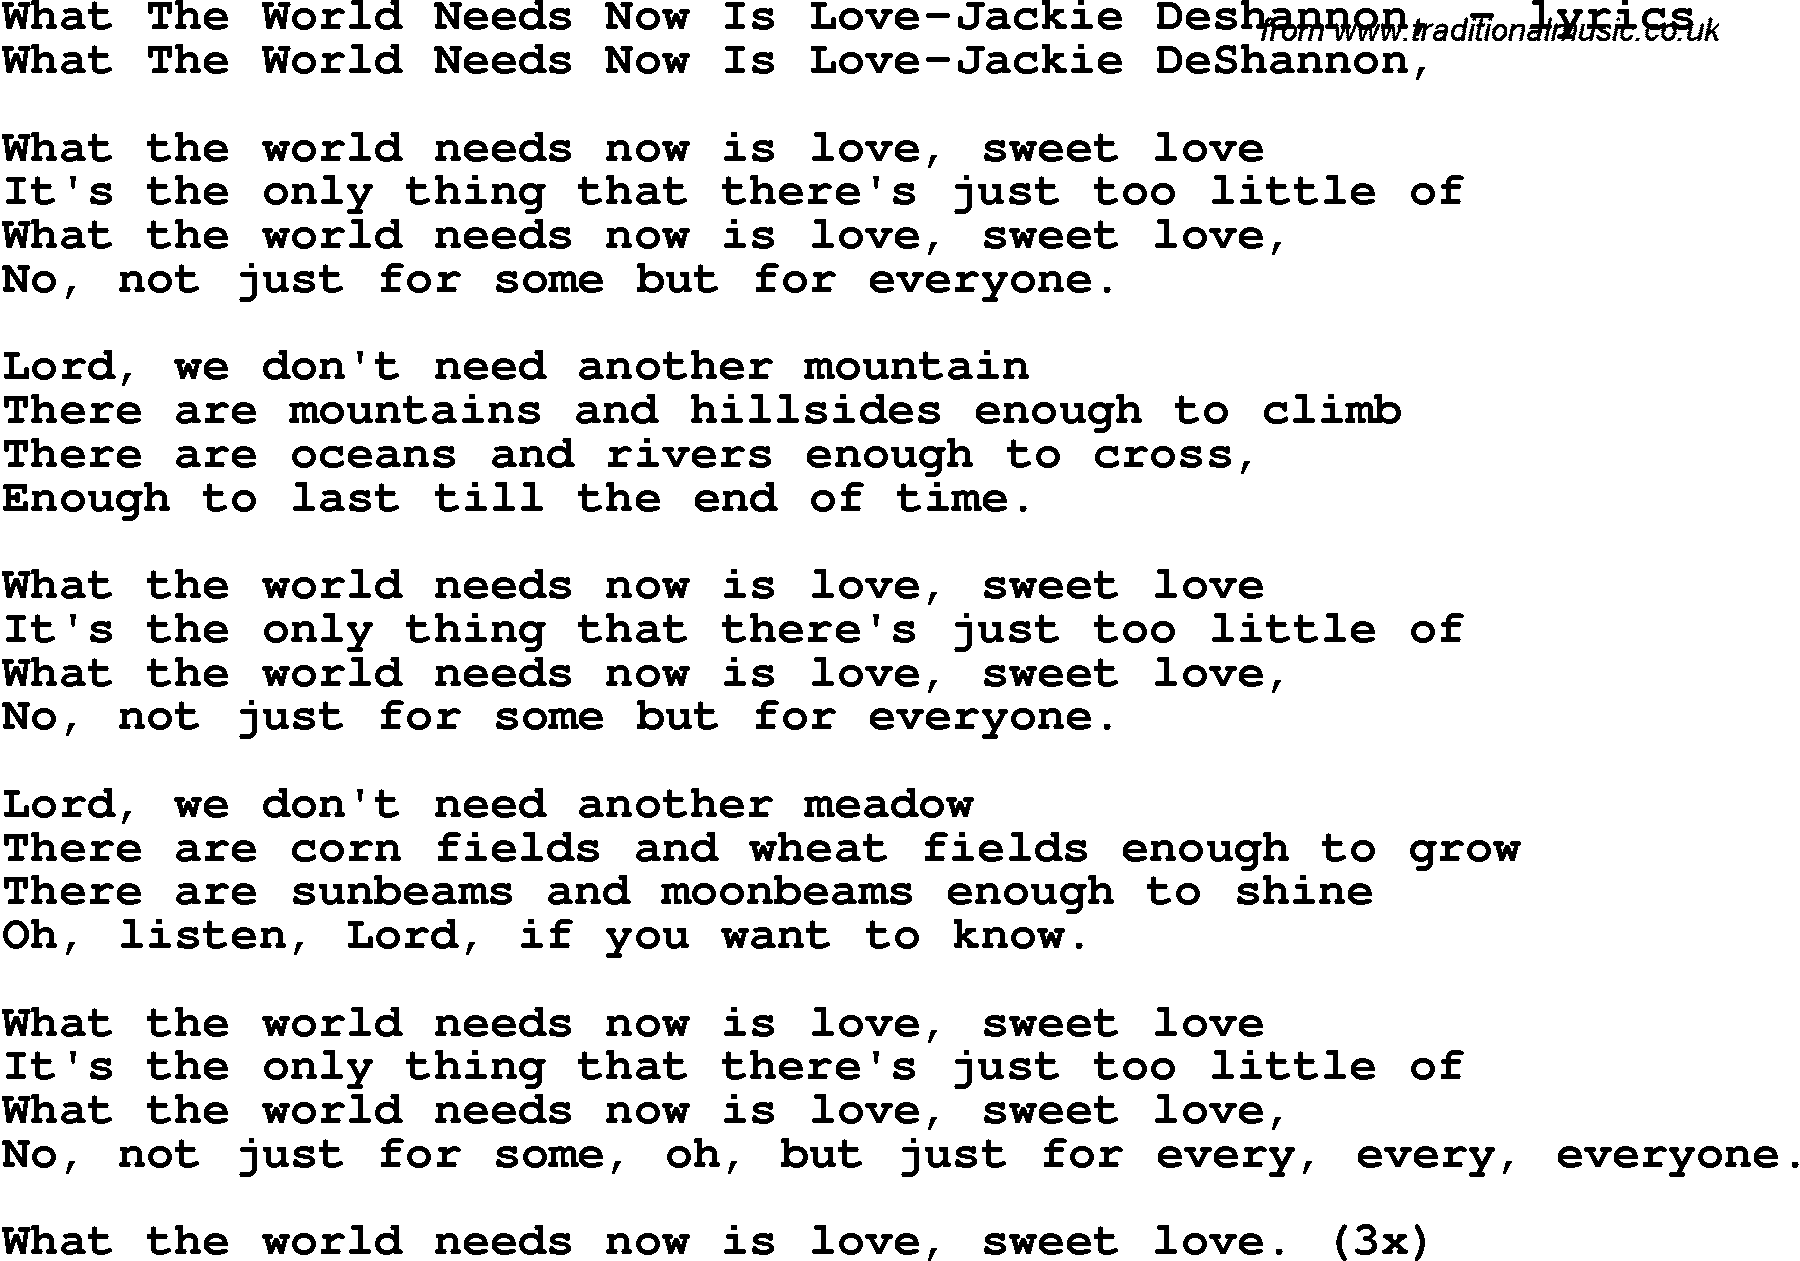 Love Song Lyrics for: What The World Needs Now Is Love-Jackie Deshannon,